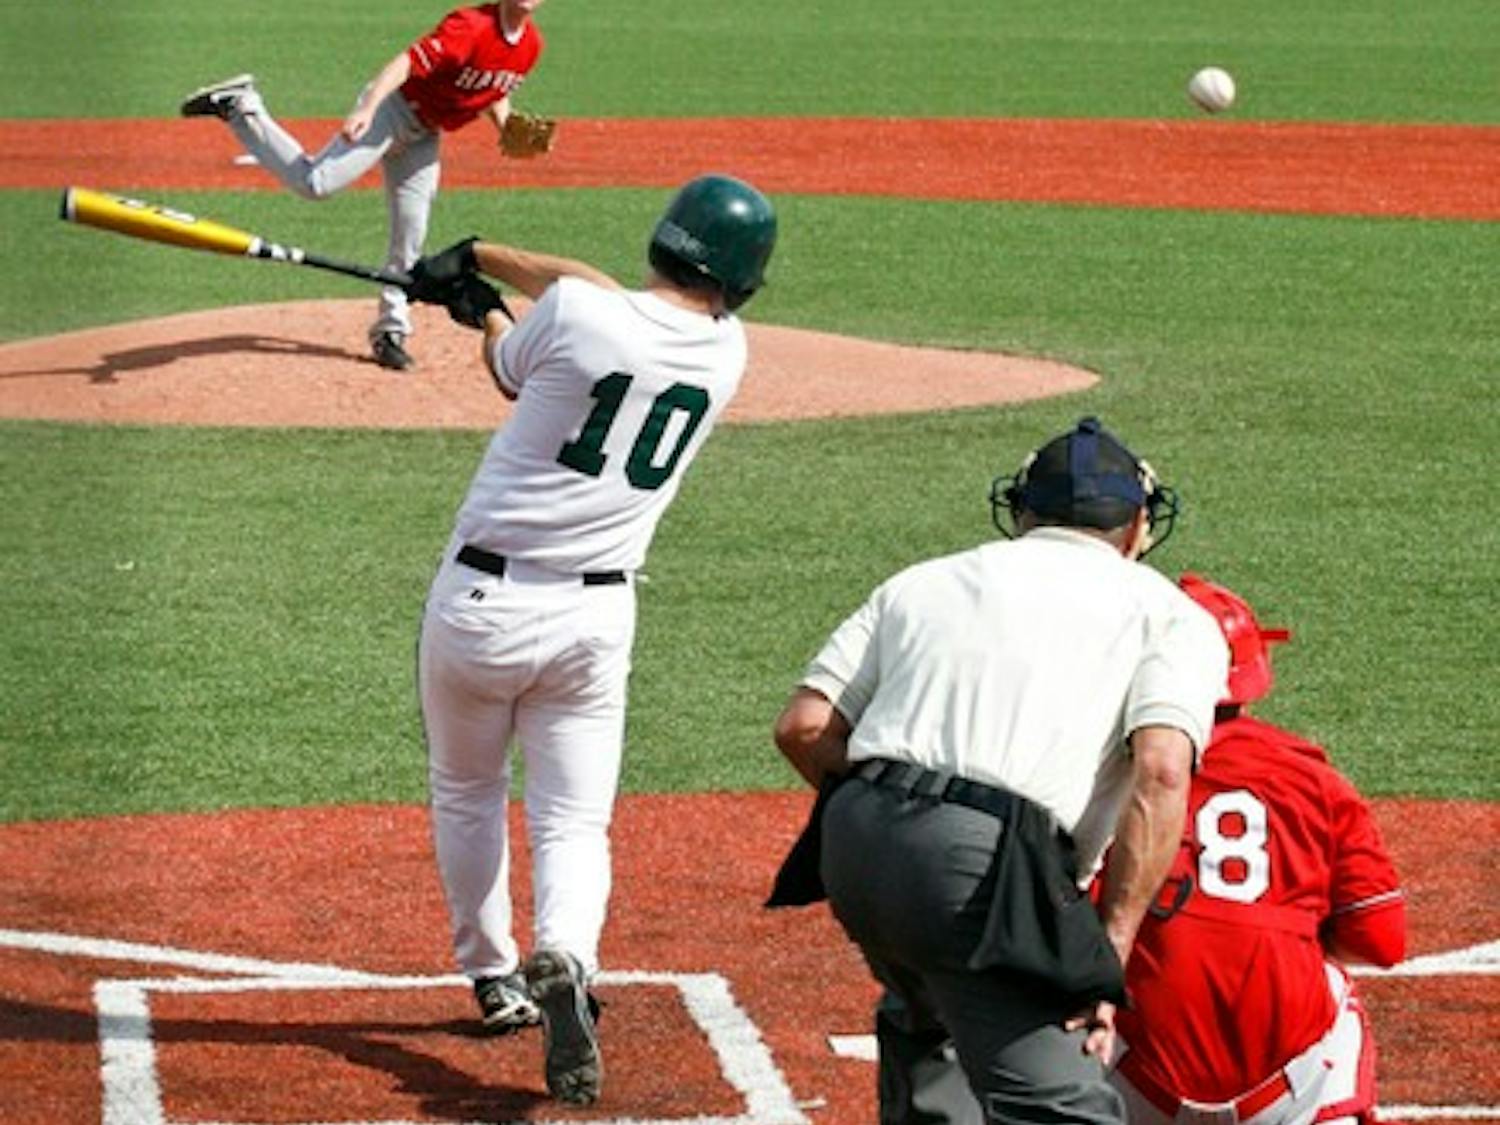 Third baseman Ray Allen '09 has helped lead the Big Green offense to a dominant season.